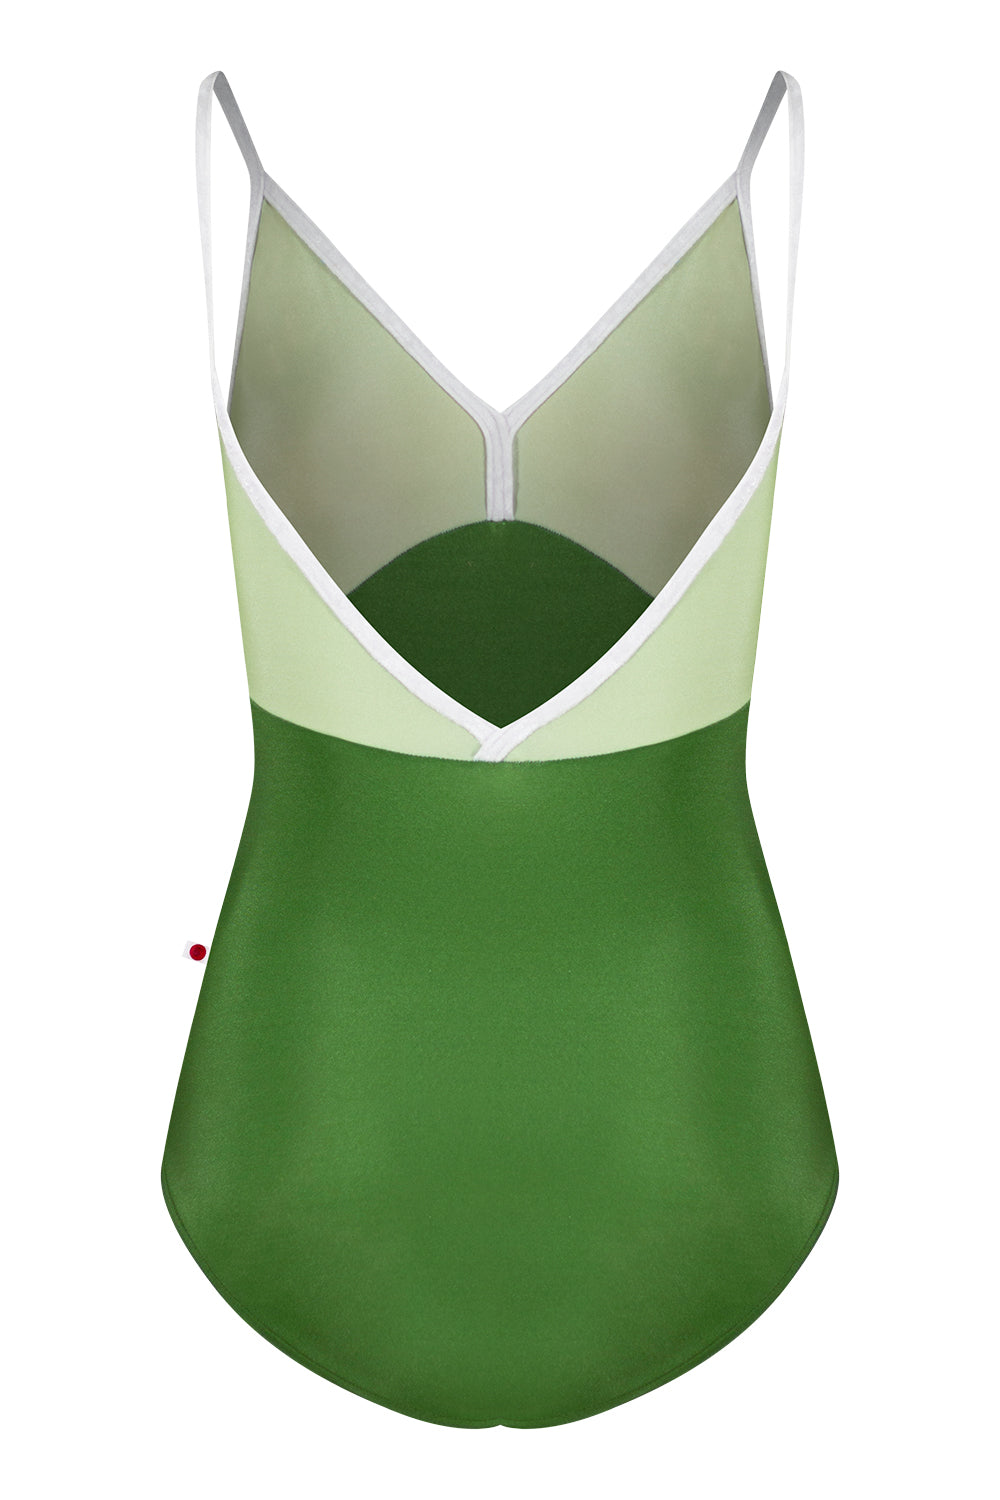 Daria leotard in N-Lucky body color with N-Ginko top color and CV-White trim color